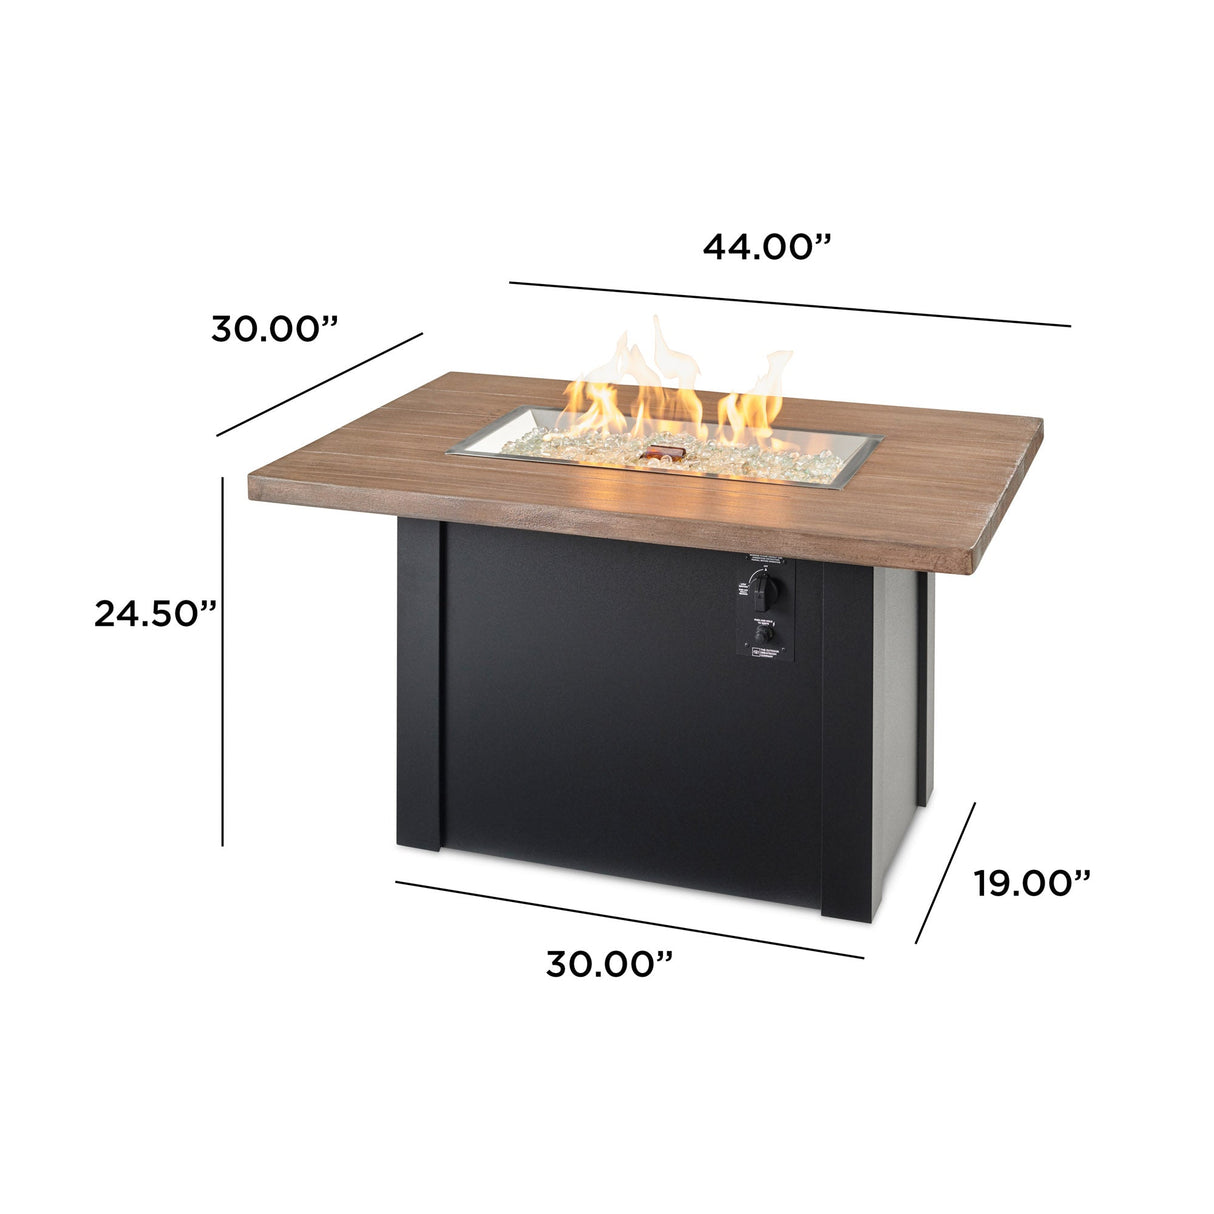 Dimensions overlaid on the Havenwood Rectangular Gas Fire Pit Table with a Driftwood base and Luverne Black base